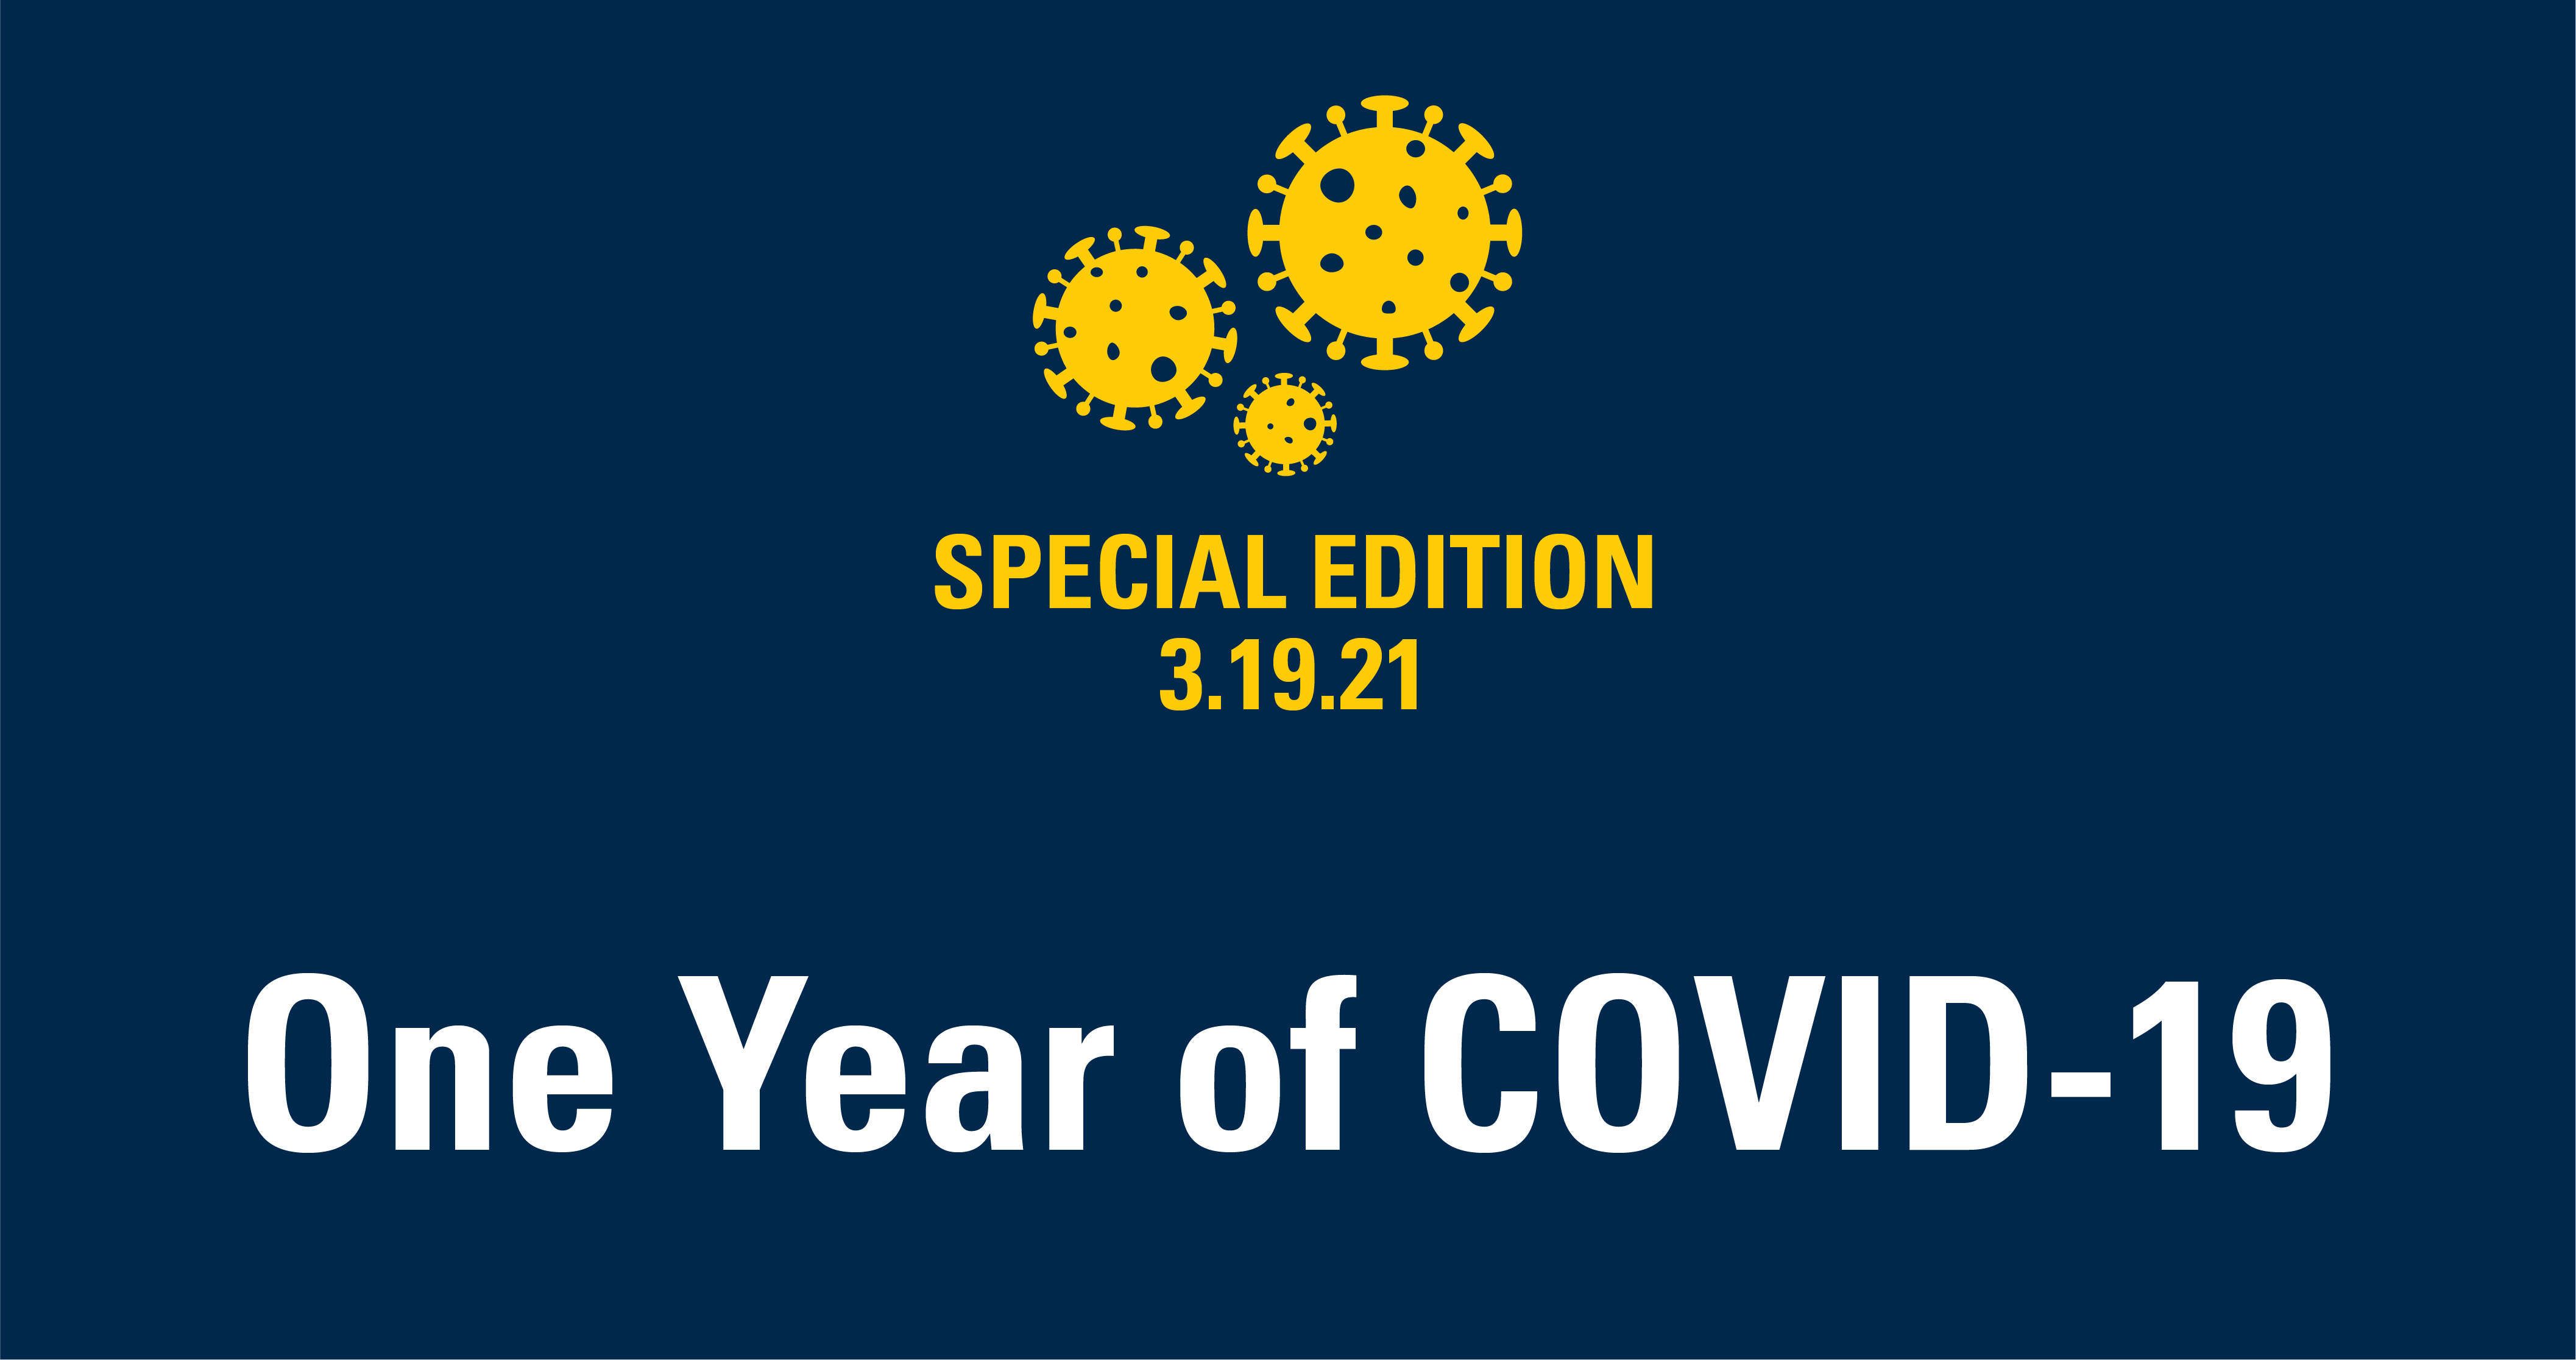 One Year of COVID-19